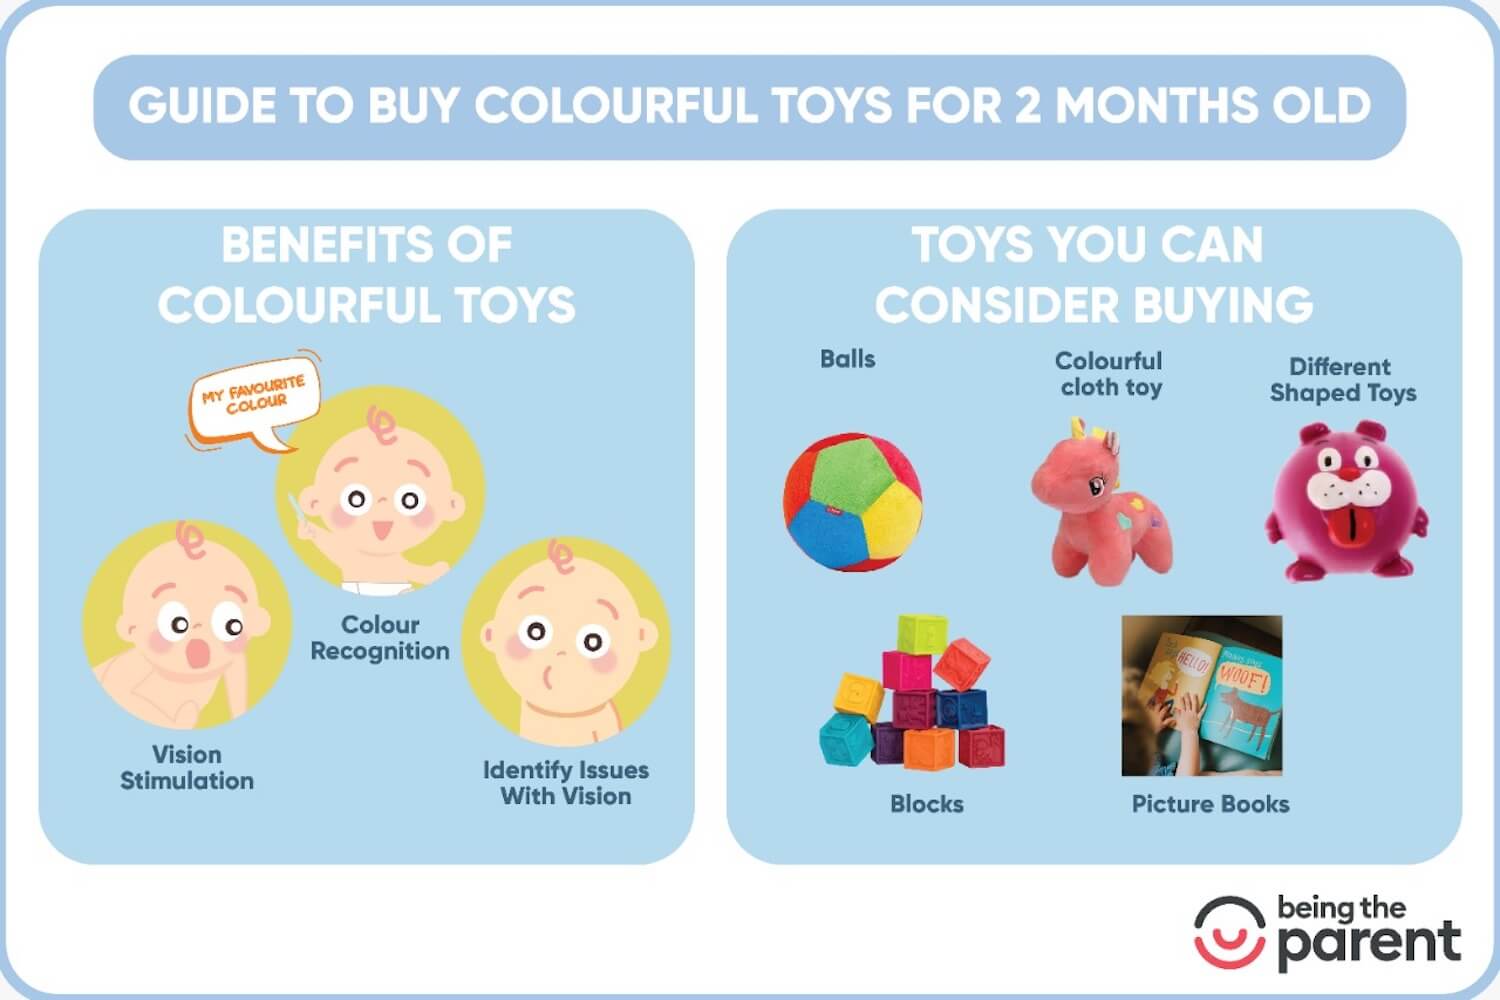 Colorful toys for 2 month old